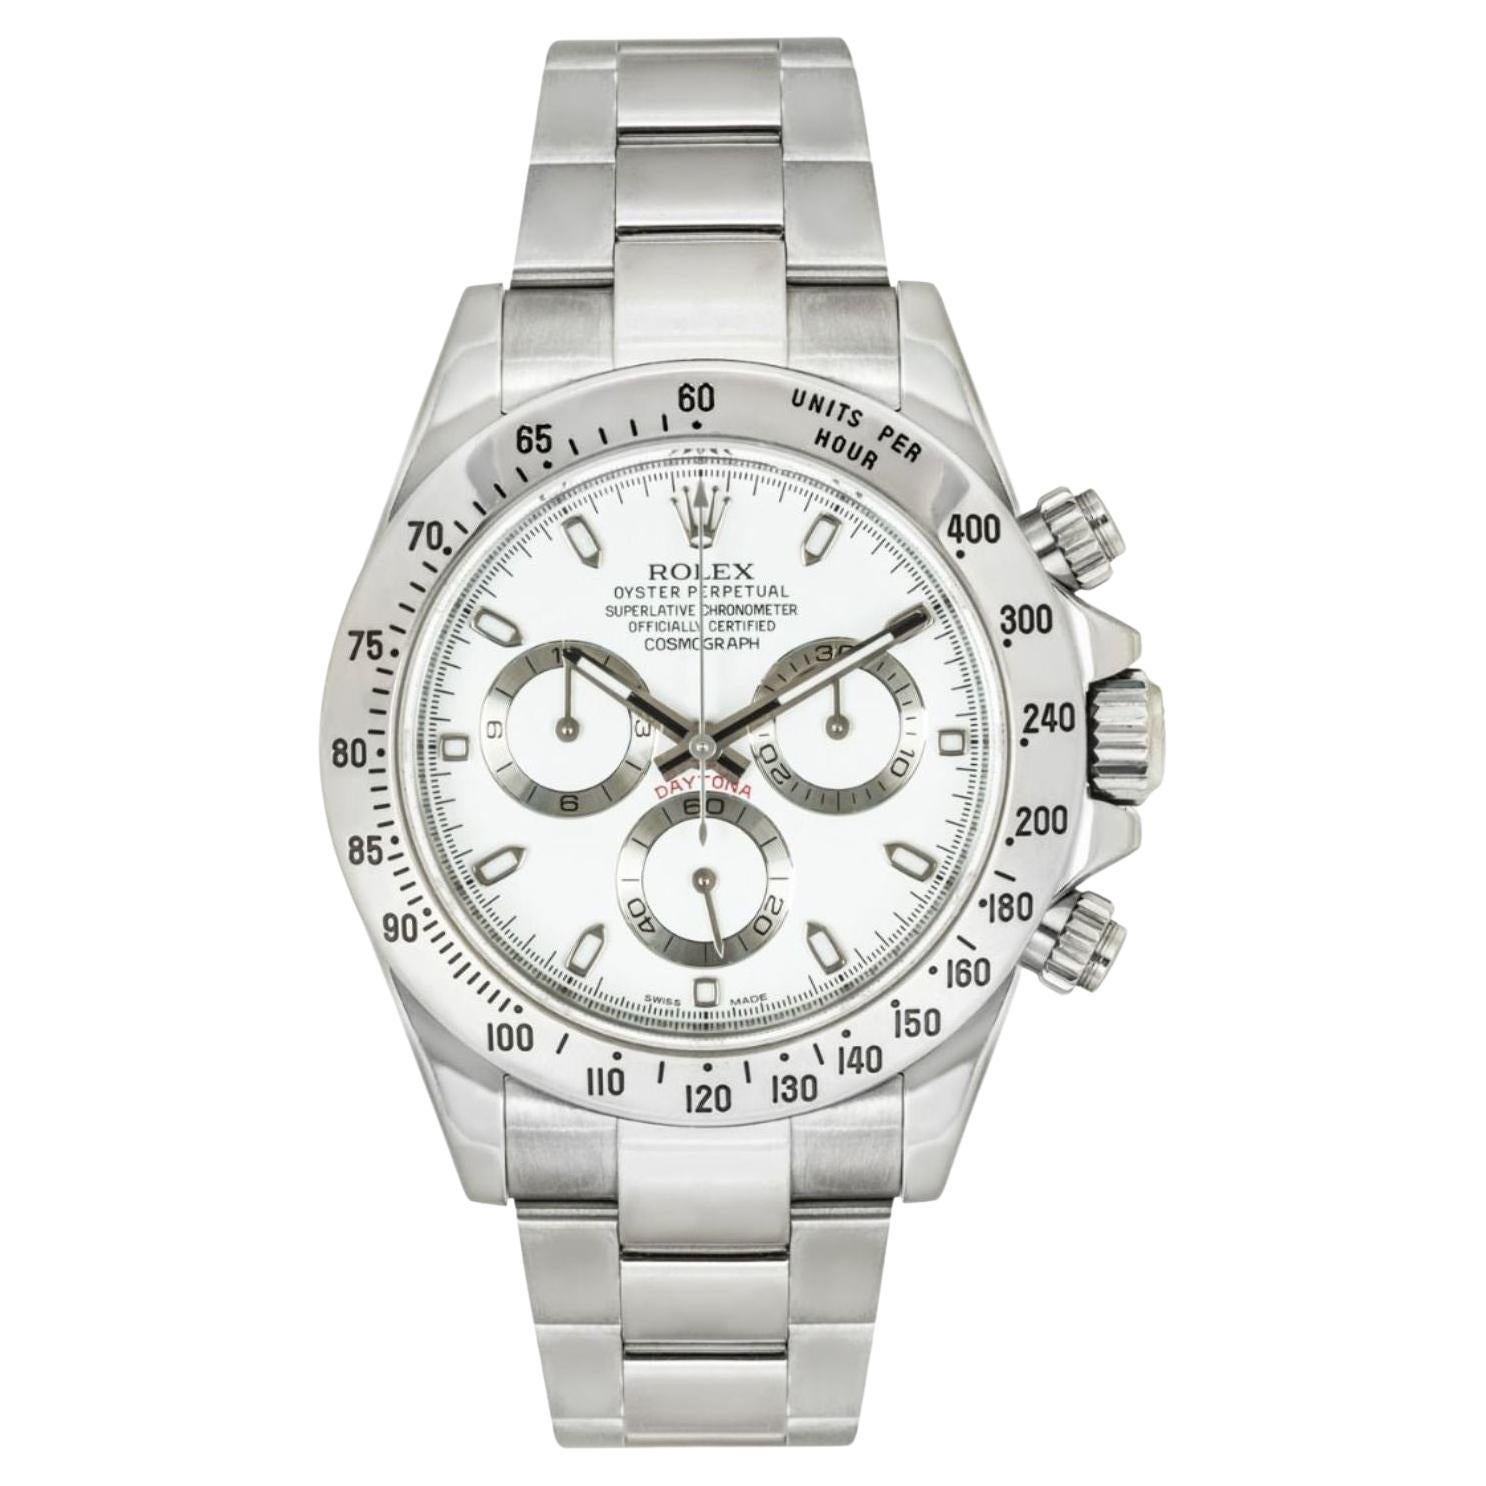 Rolex Daytona APH White Dial 116520 For Sale at 1stDibs